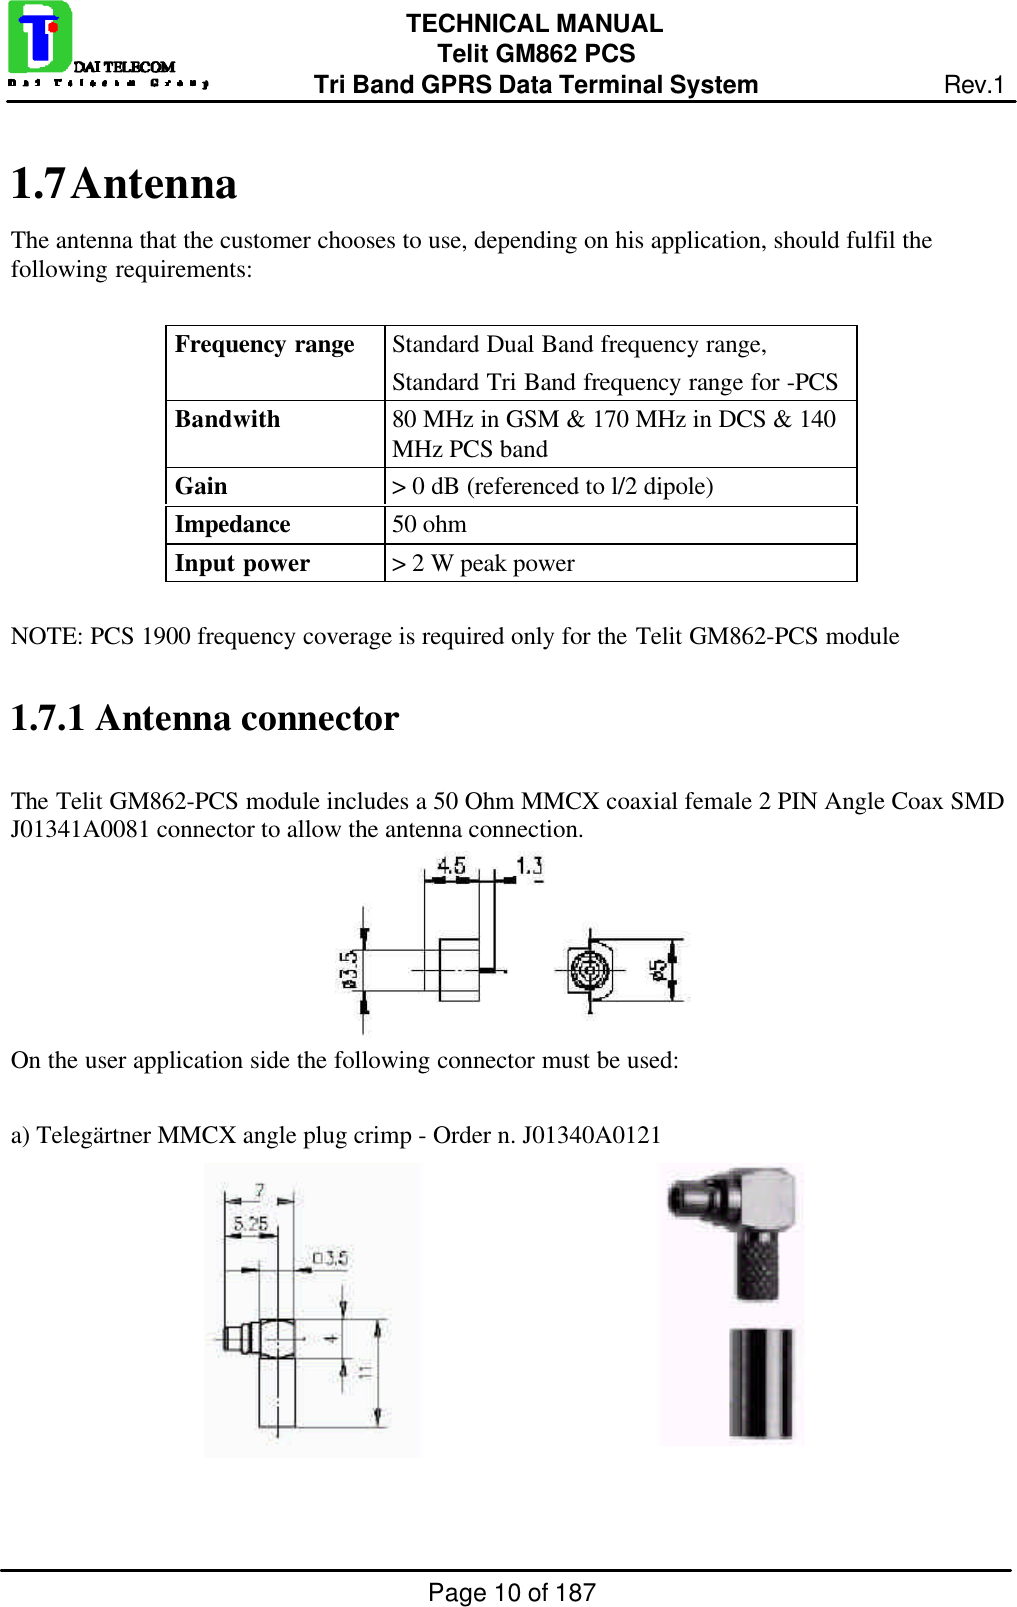 Page 10 of 187TECHNICAL MANUALTelit GM862 PCSTri Band GPRS Data Terminal System Rev.11.7 AntennaThe antenna that the customer chooses to use, depending on his application, should fulfil thefollowing requirements:Frequency range Standard Dual Band frequency range,Standard Tri Band frequency range for -PCSBandwith 80 MHz in GSM &amp; 170 MHz in DCS &amp; 140MHz PCS bandGain &gt; 0 dB (referenced to l/2 dipole)Impedance 50 ohmInput power &gt; 2 W peak powerNOTE: PCS 1900 frequency coverage is required only for the Telit GM862-PCS module1.7.1  Antenna connectorThe Telit GM862-PCS module includes a 50 Ohm MMCX coaxial female 2 PIN Angle Coax SMDJ01341A0081 connector to allow the antenna connection.On the user application side the following connector must be used:a) Telegärtner MMCX angle plug crimp - Order n. J01340A0121